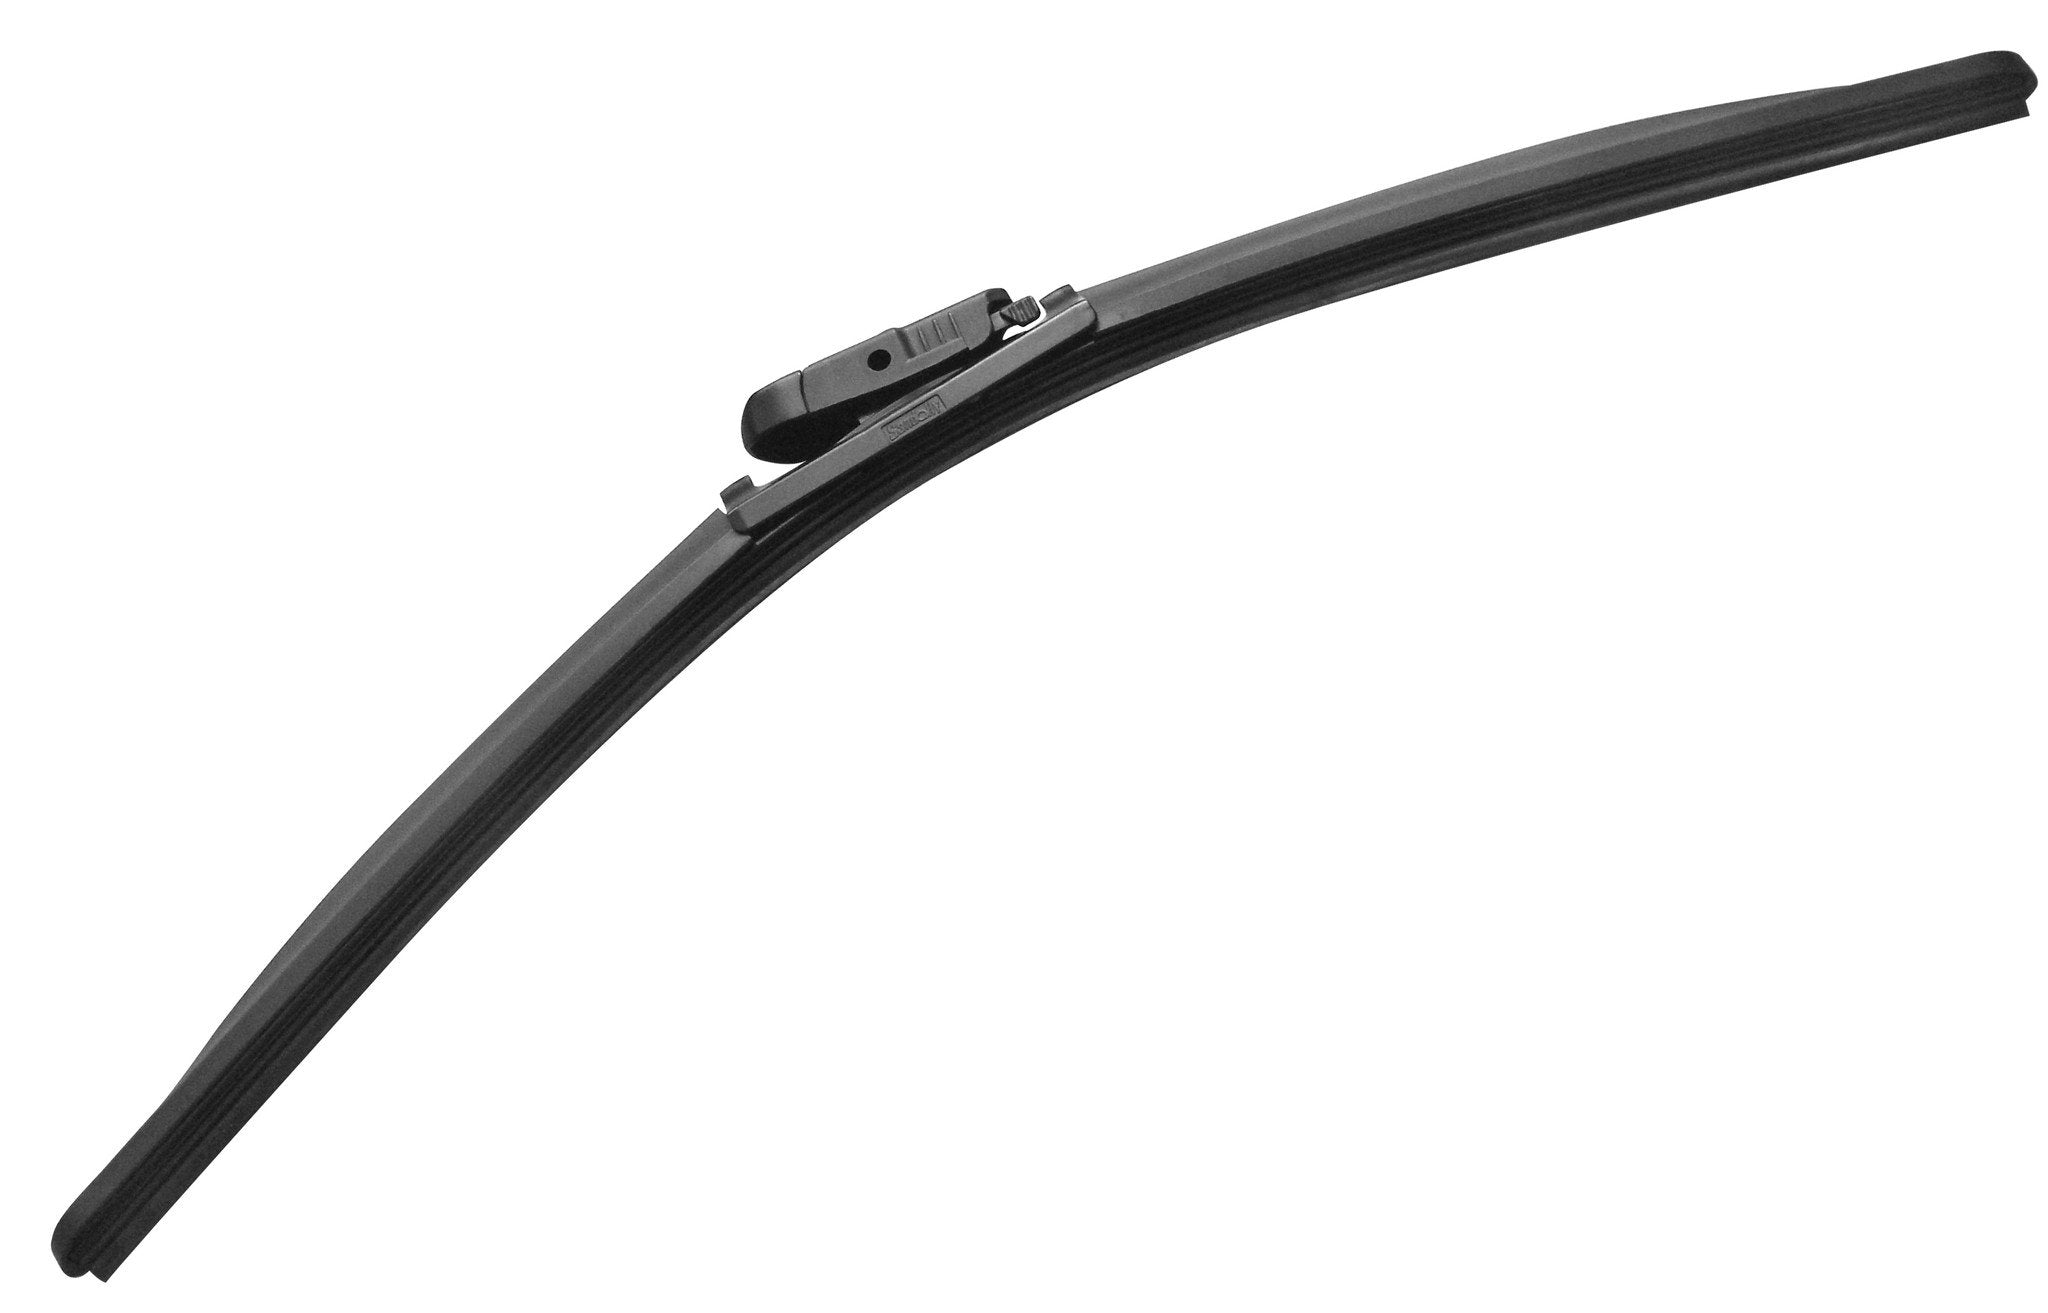 Flat Blade Windscreen Wipers - All Sizes - spo-cs-disabled - spo-default - spo-disabled - spo-notify-me-disabled